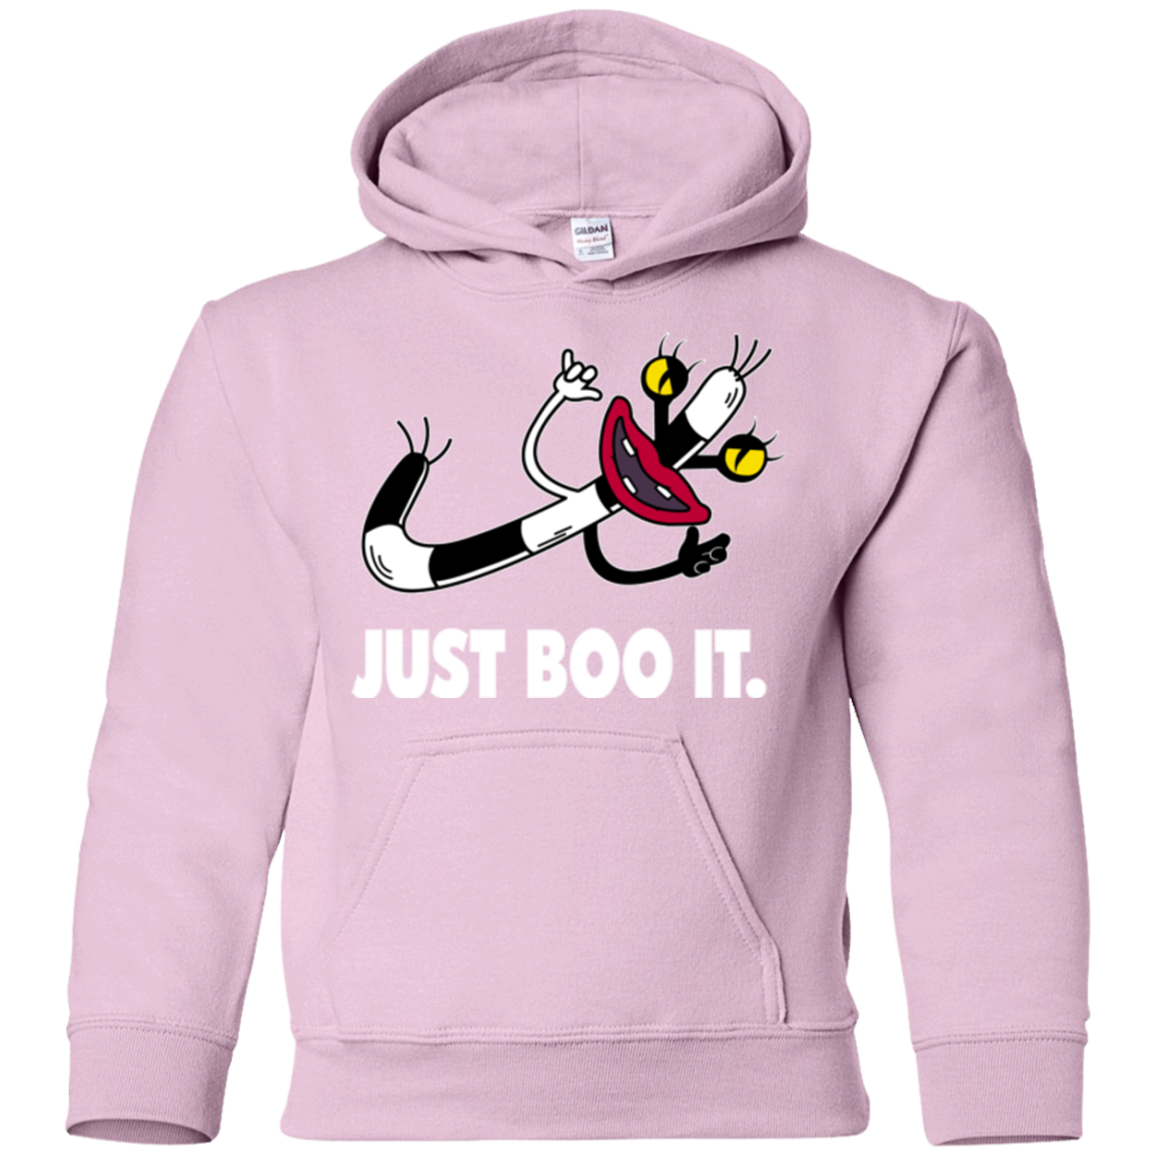 Just Boo It Youth Hoodie